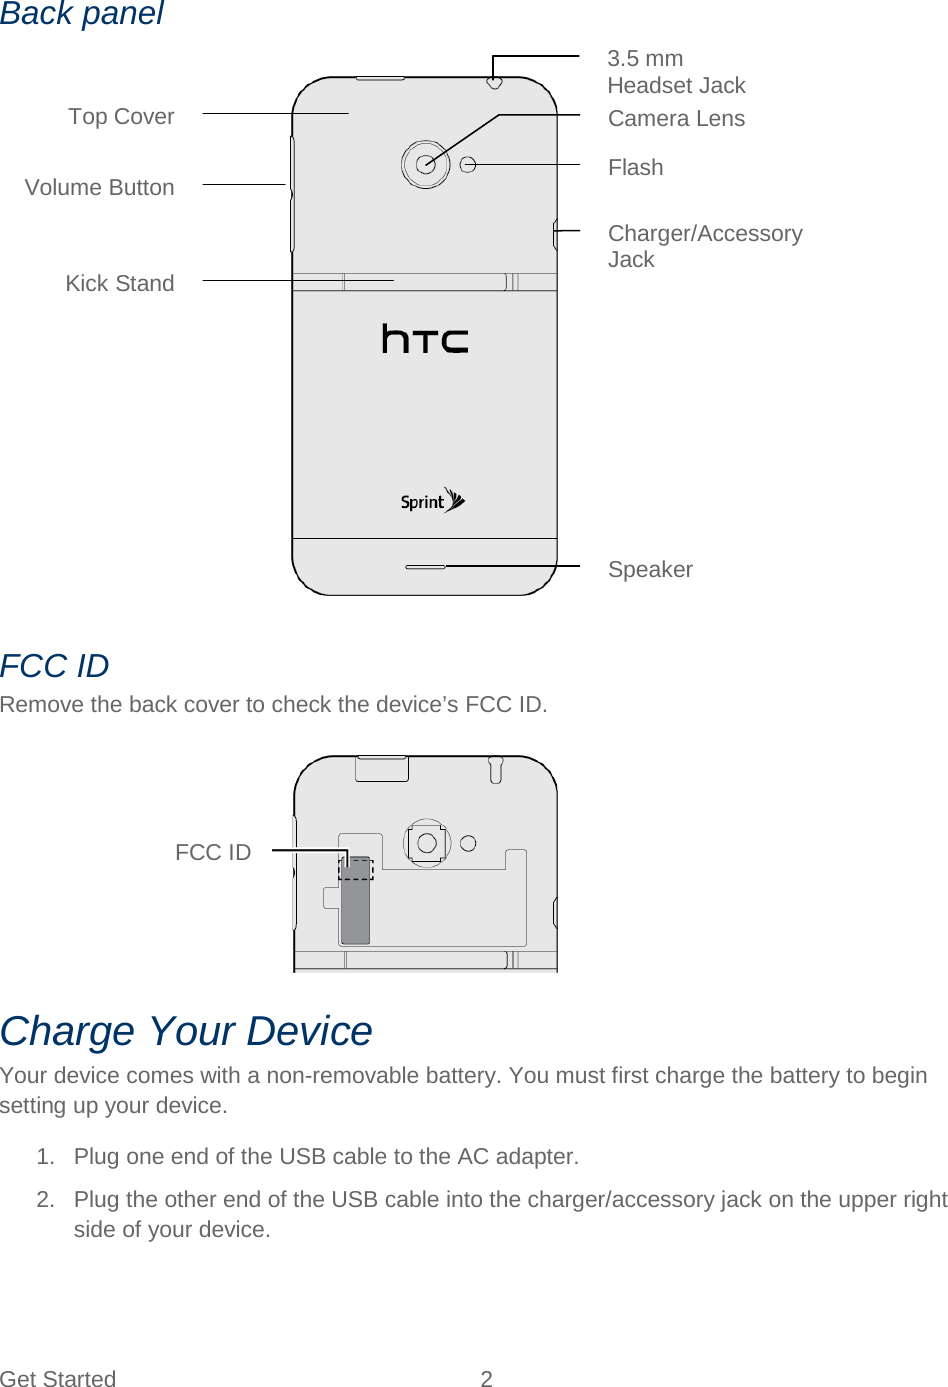  Get Started  2   Back panel  FCC ID Remove the back cover to check the device’s FCC ID.  Charge Your Device Your device comes with a non-removable battery. You must first charge the battery to begin setting up your device. 1. Plug one end of the USB cable to the AC adapter. 2. Plug the other end of the USB cable into the charger/accessory jack on the upper right side of your device. FCC ID Camera Lens Charger/Accessory Jack  Top Cover Flash 3.5 mm Headset Jack  Volume Button Kick Stand Speaker 